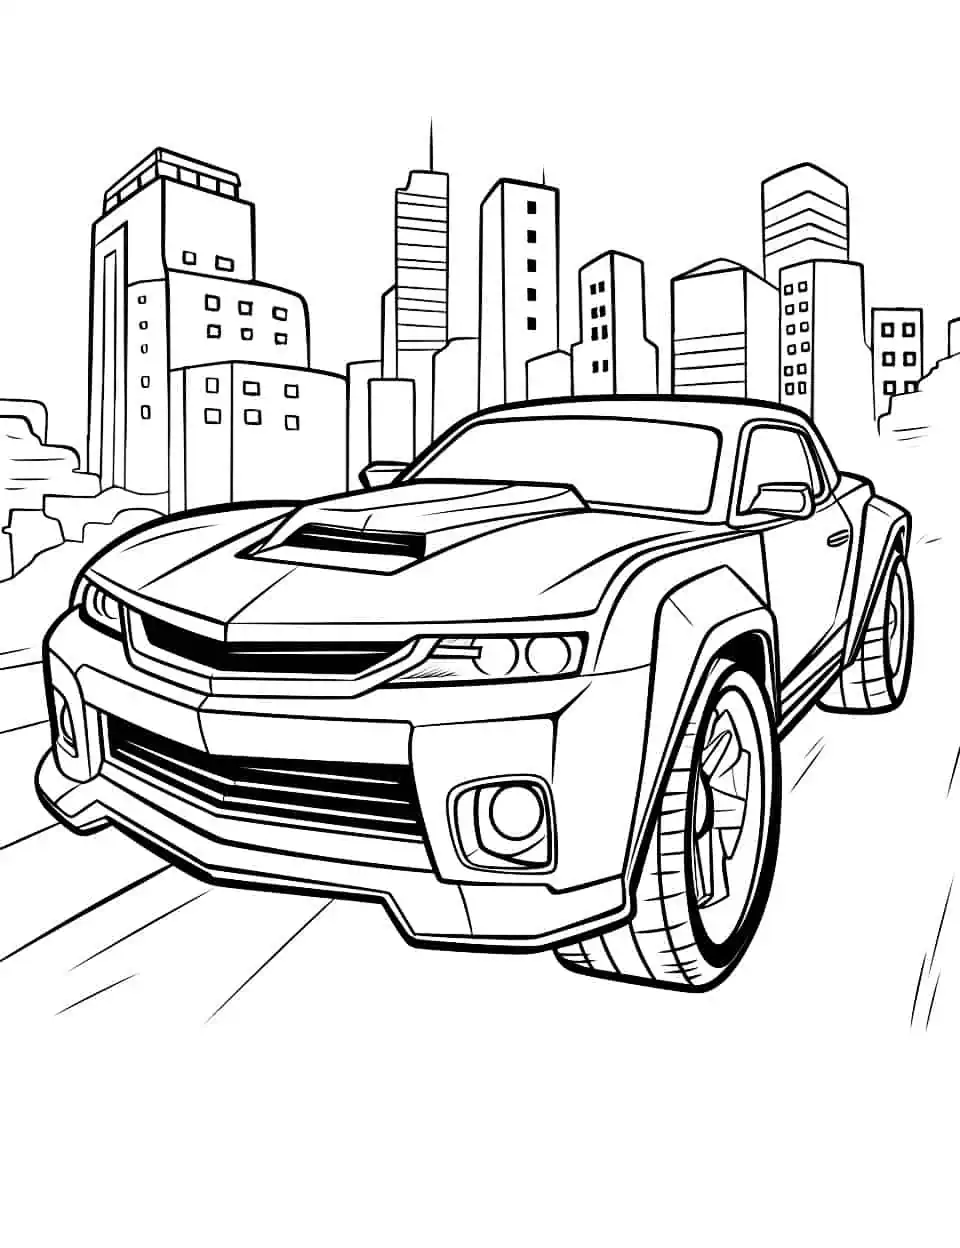 Bumblebee Adventure Car Coloring Page - A picture of Bumblebee from the Transformers movie in his car form.